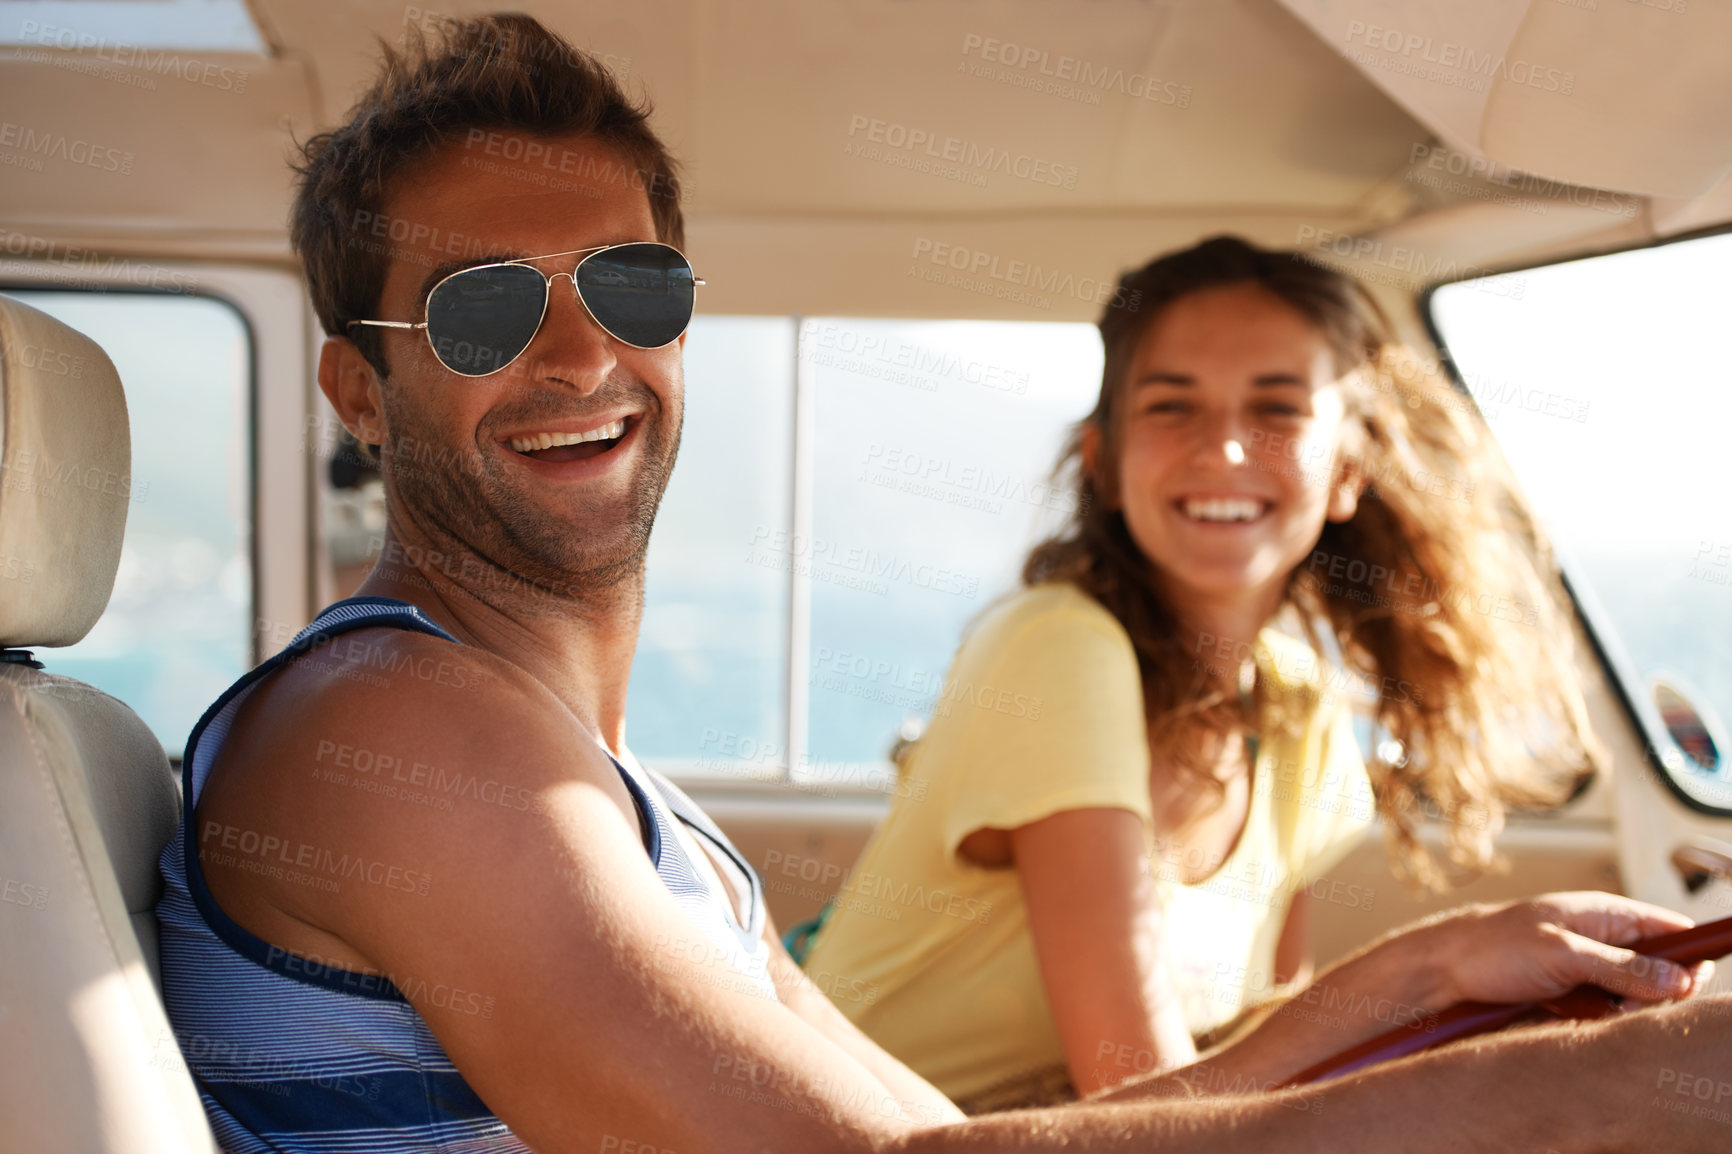 Buy stock photo Handsome male wearing glasses smiling and laughing with his girlfriend in the background